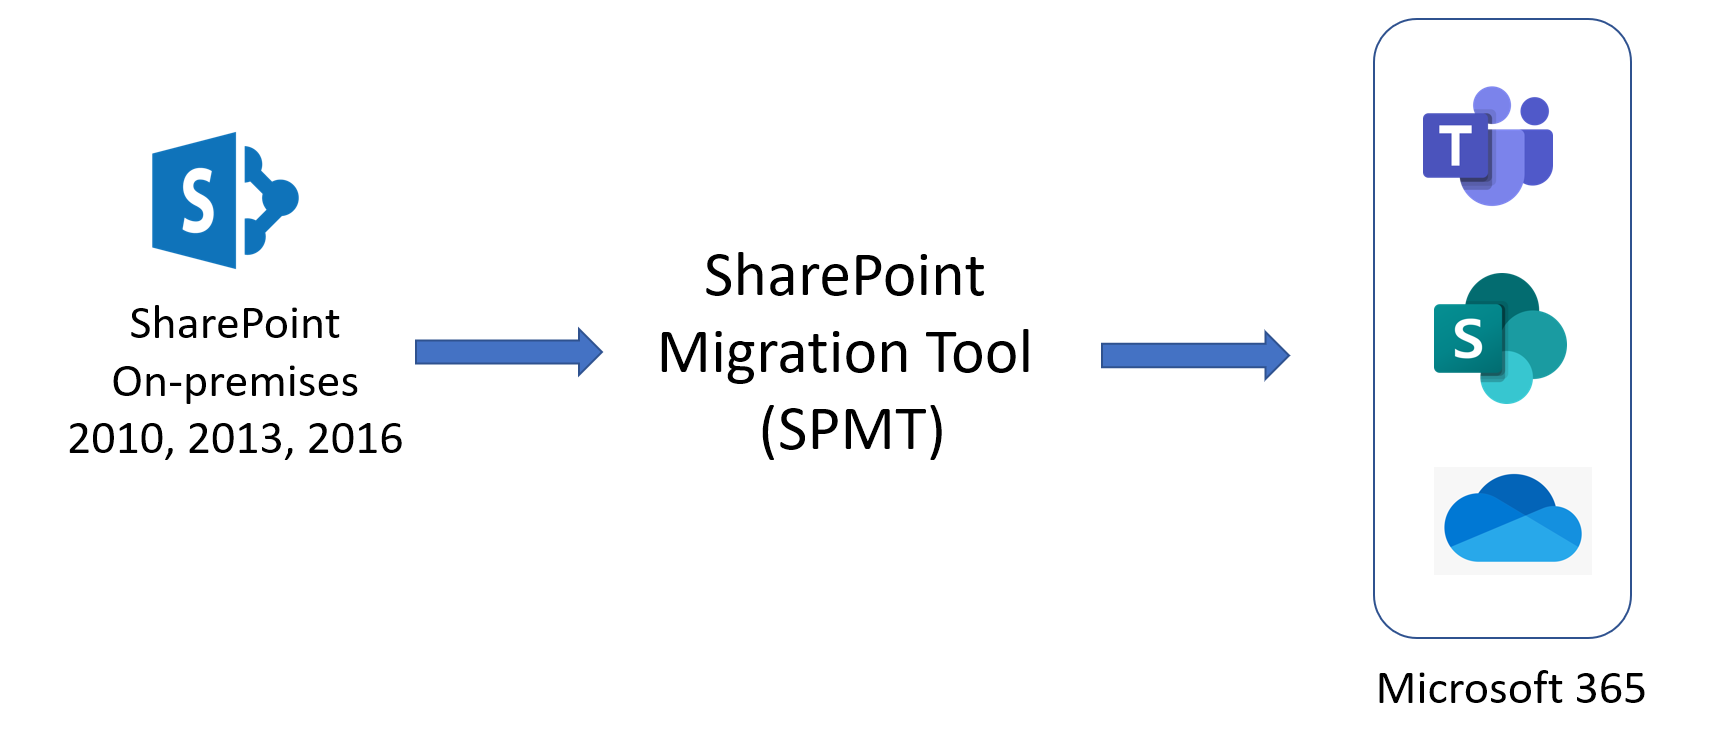 Migrating content to SharePoint Online with SharePoint Migration Tool (SPMT)